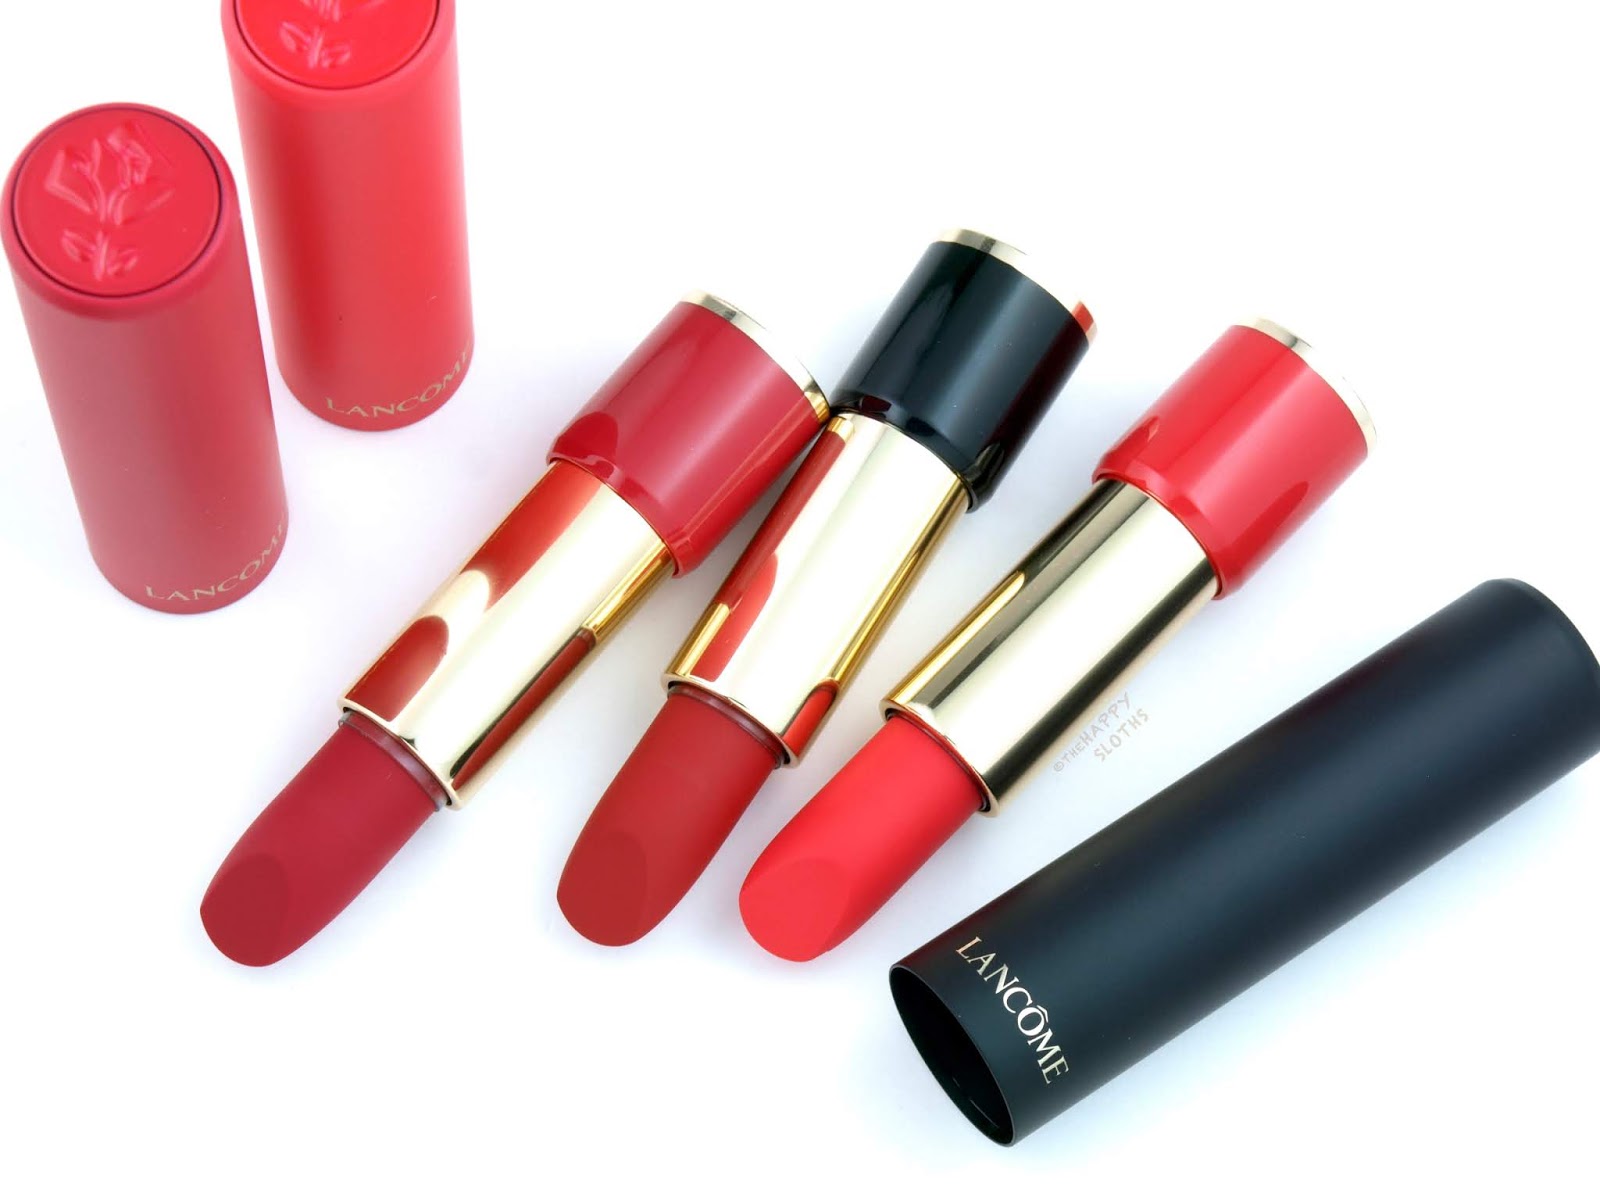 Lancome | L'Absolu Rouge Drama Matte Lipstick: Review and Swatches